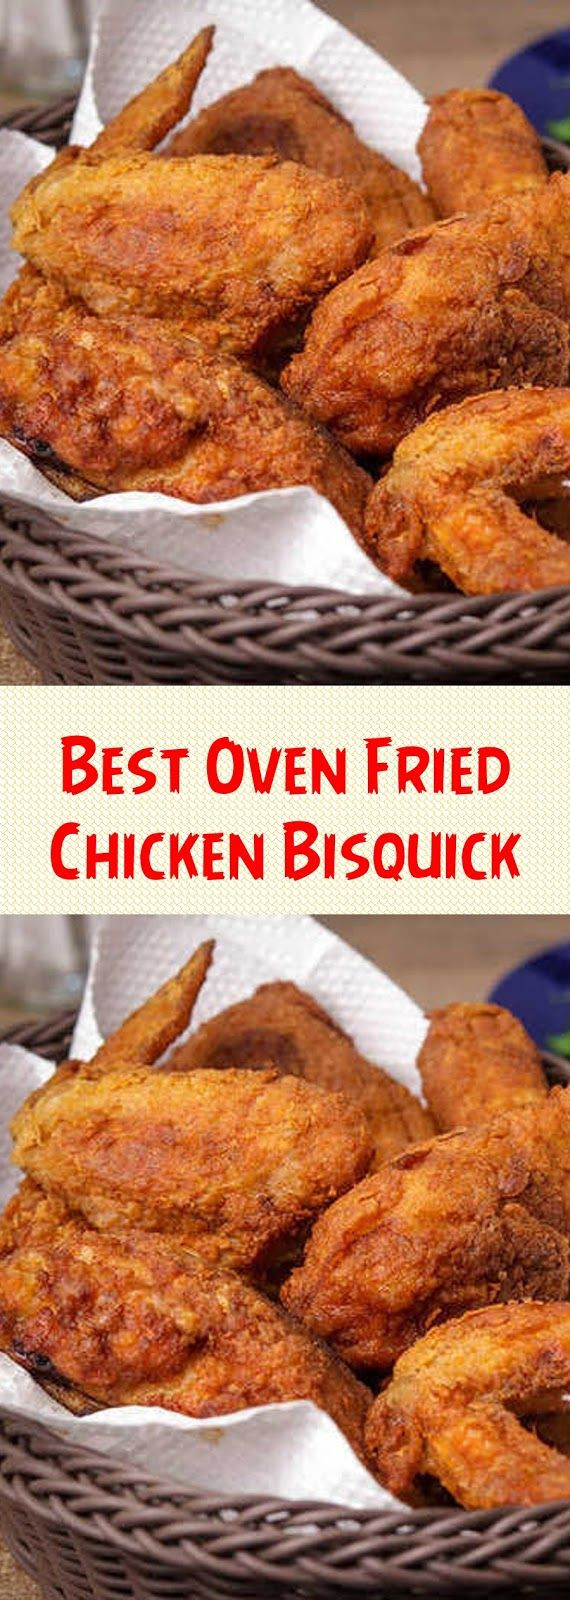 The 30 Best Ideas for Bisquick Oven Fried Chicken - Best Recipes Ideas ...